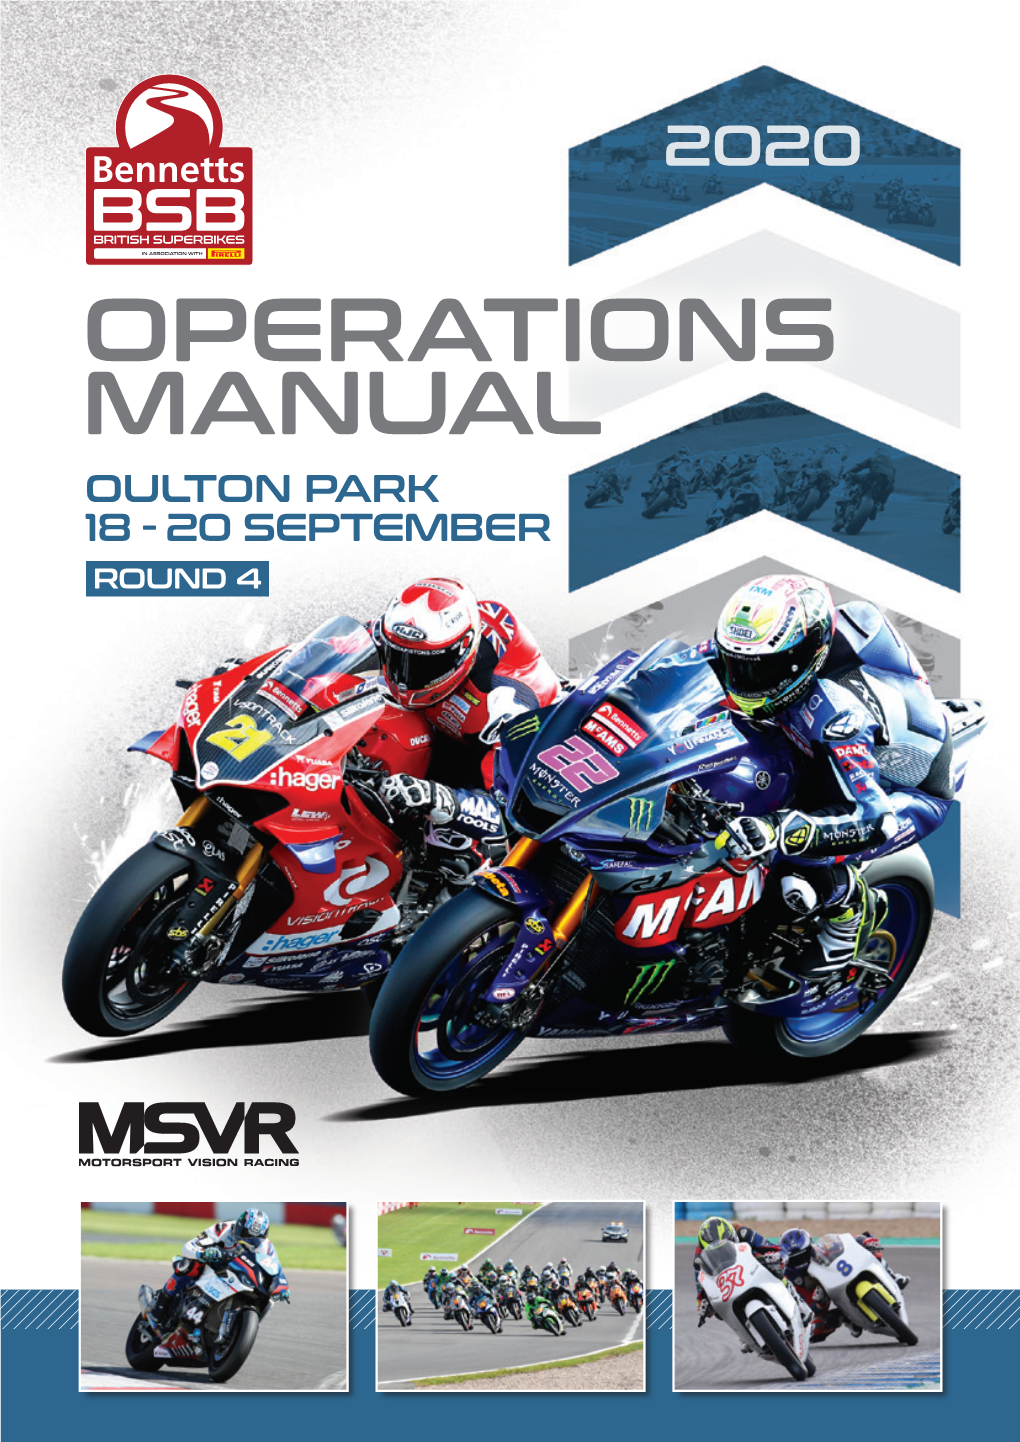 Operations Manual Oulton Park 18 - 20 September Round 4